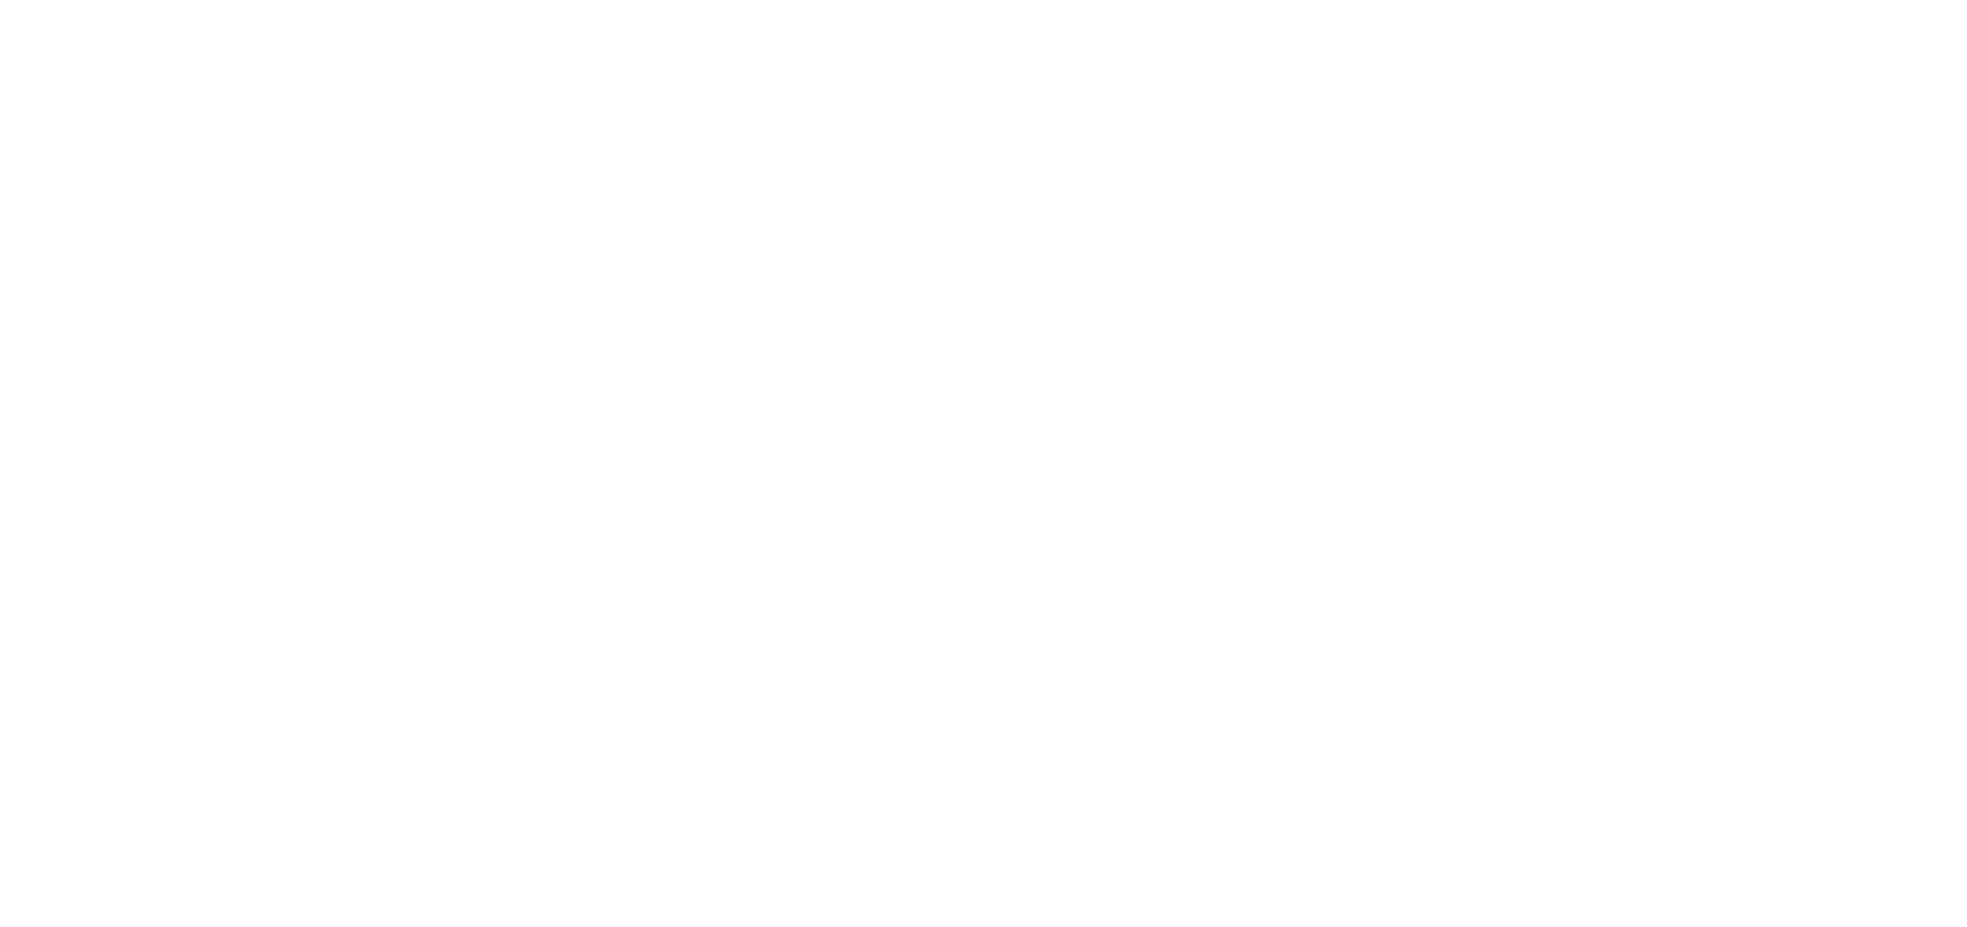 Helix Bar Review Flashcard Sets